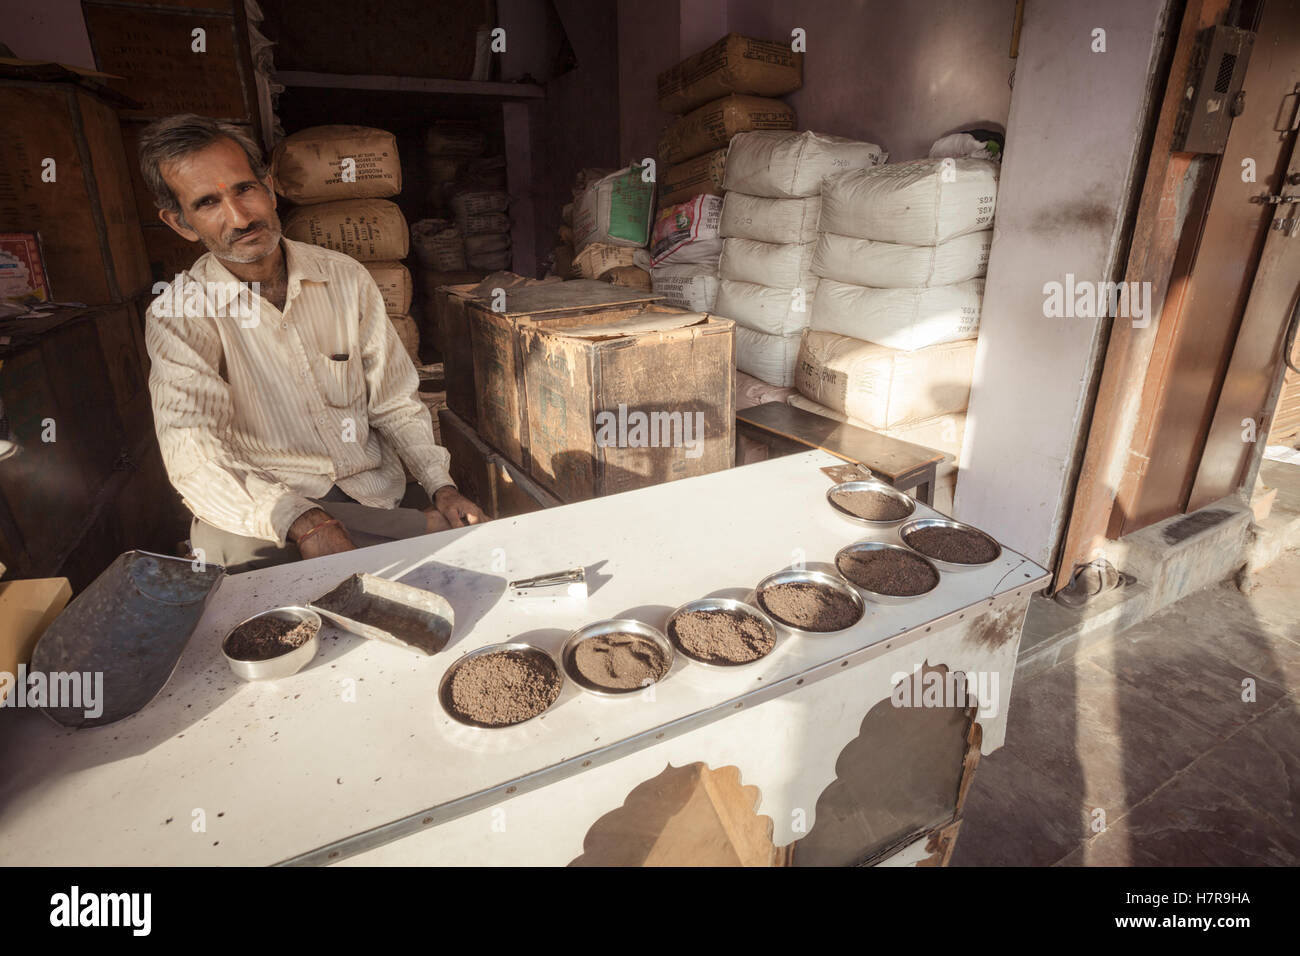 A traditional tea seller in a shop in Jaipur, INDIA, selling different types of leaf tea or chai Stock Photo